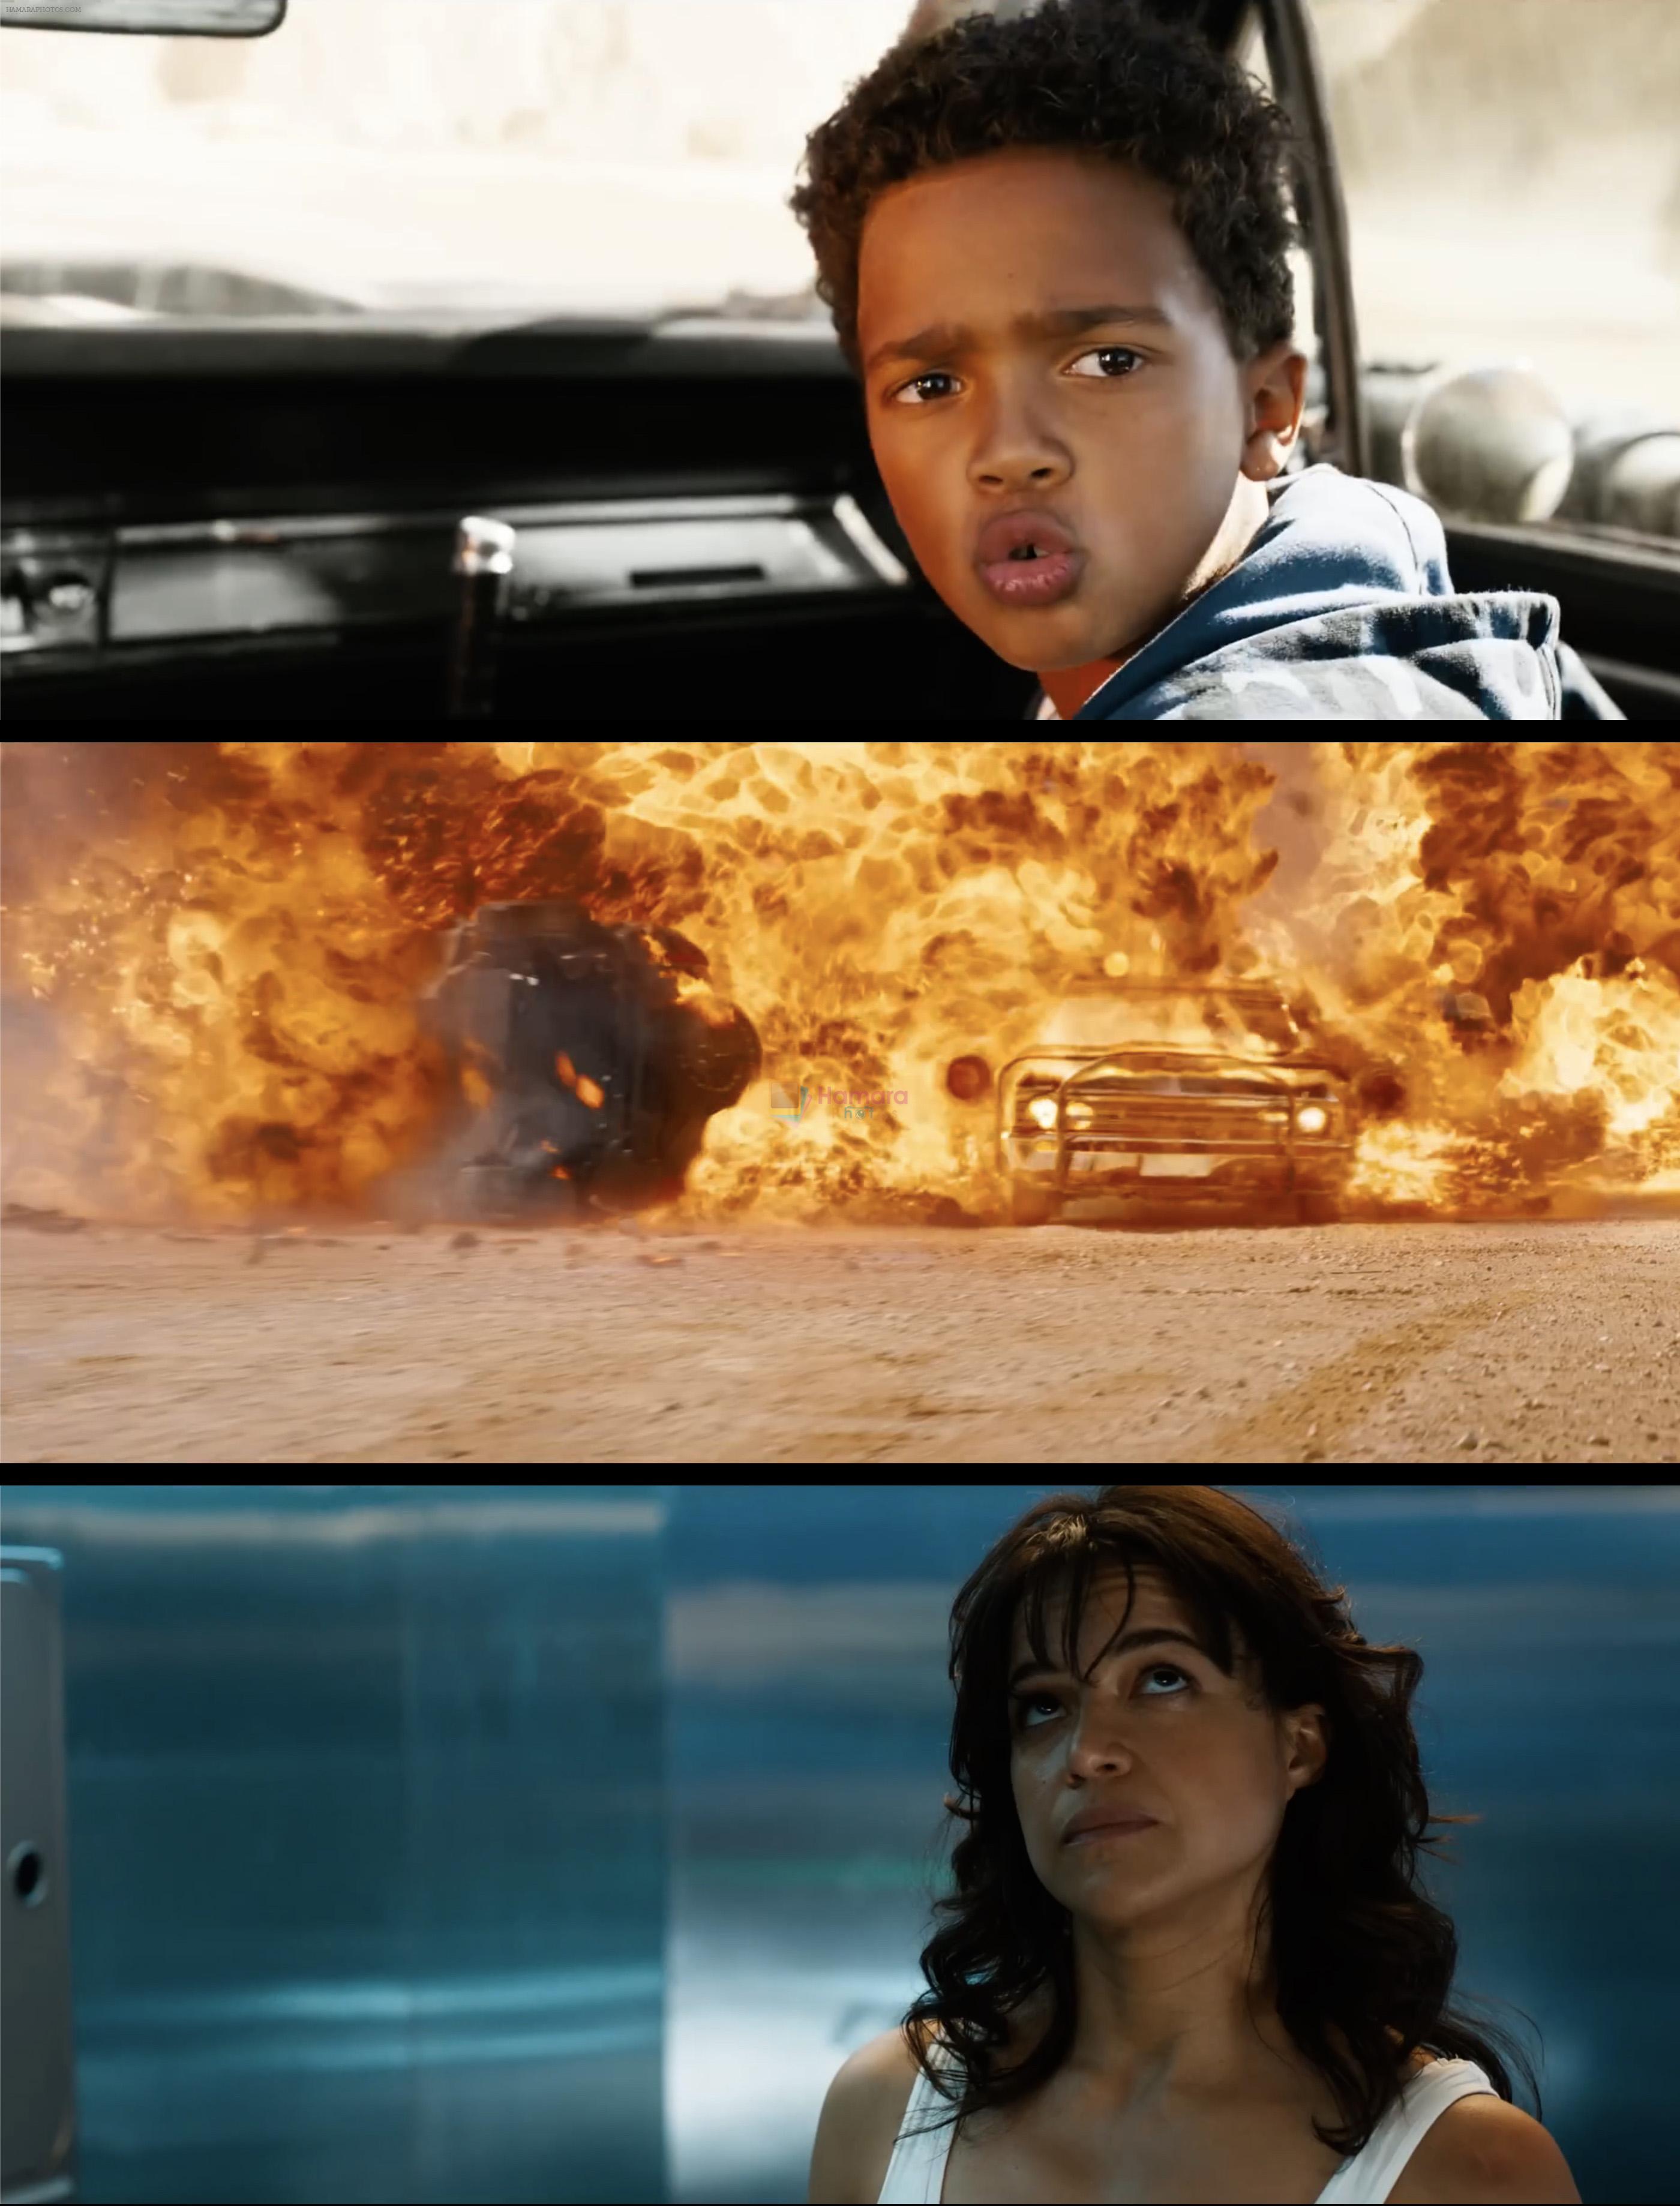 Leo Abelo Perry as Little Brian and Michelle Rodriguez as Letty Ortiz in Still from movie Fast X